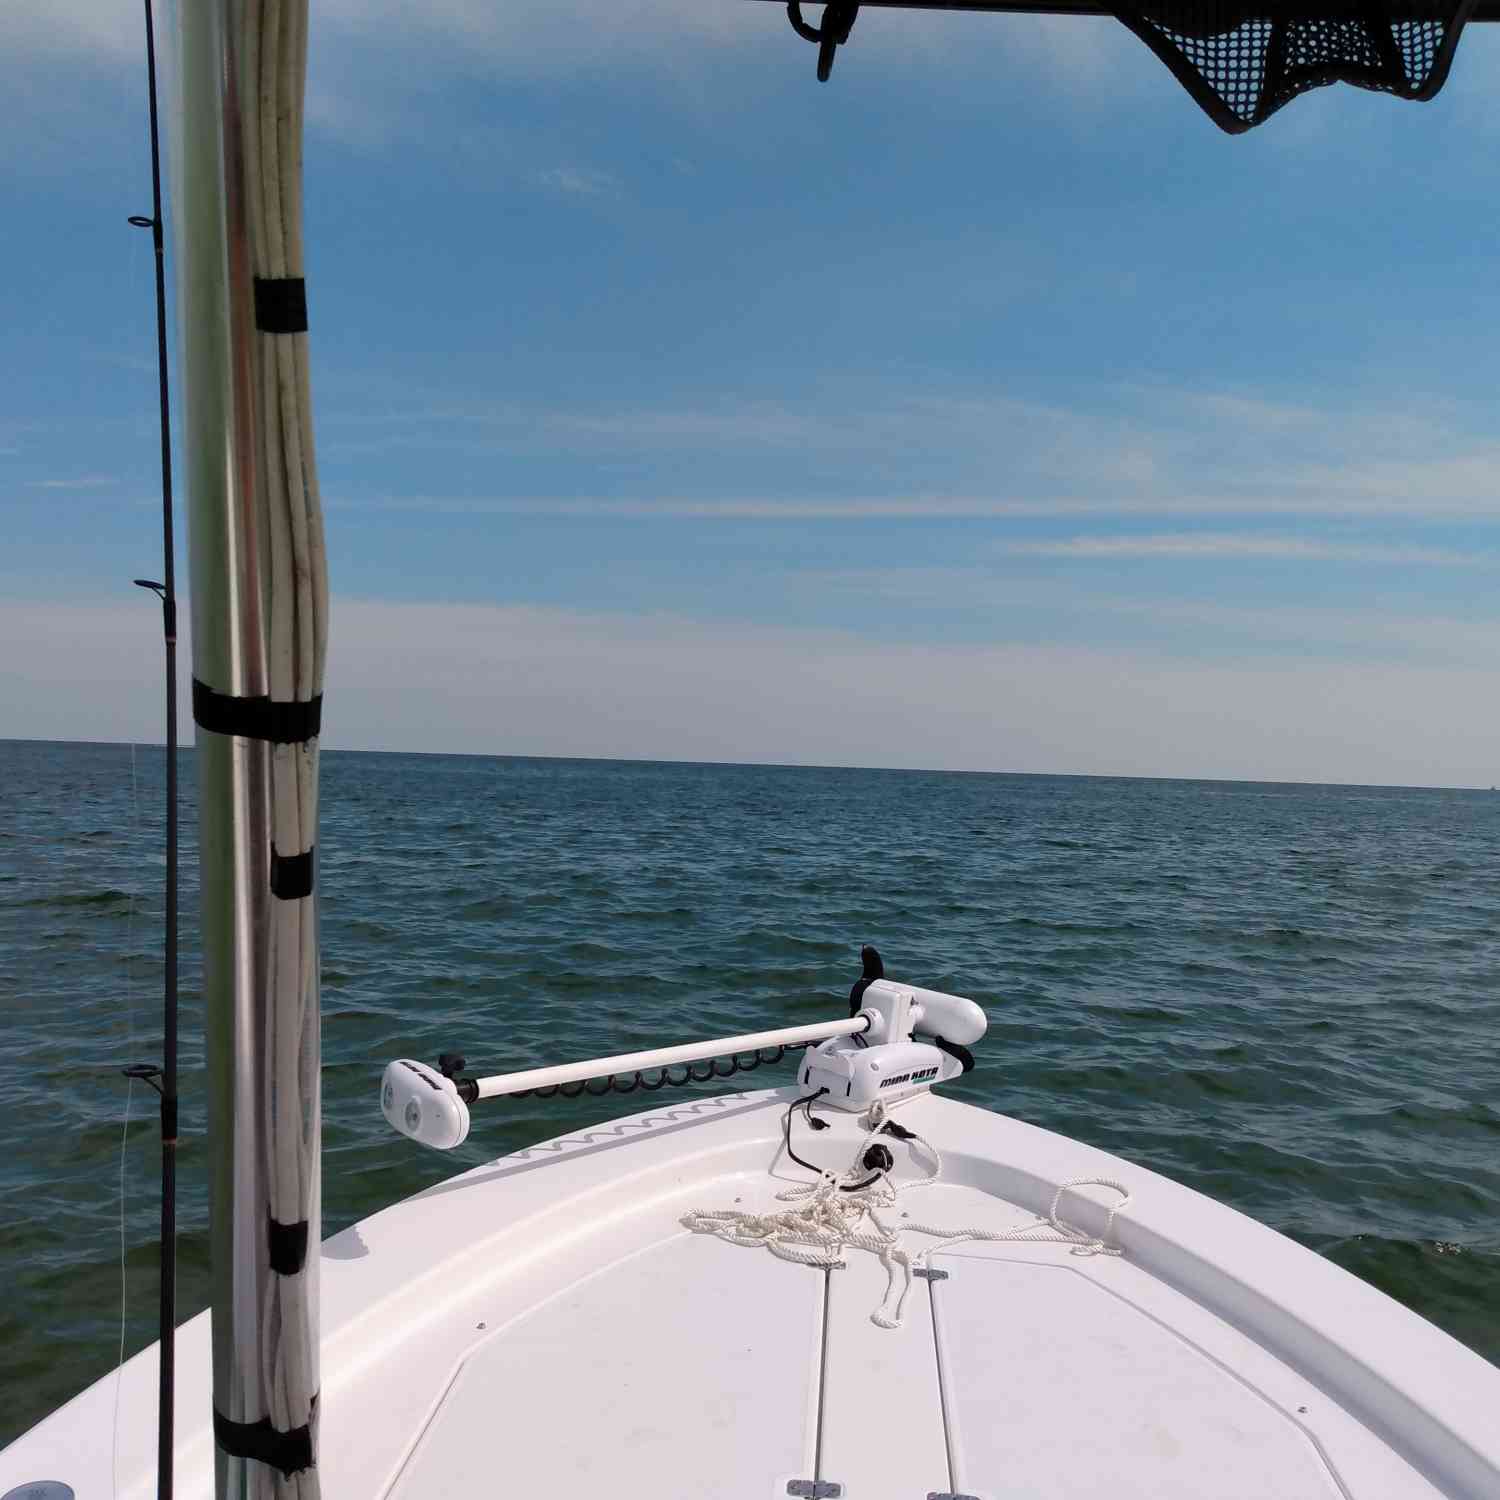 Bow shot. I'm recently the proud owner of a 2017 20 island bay. Over all I love the boat. I...